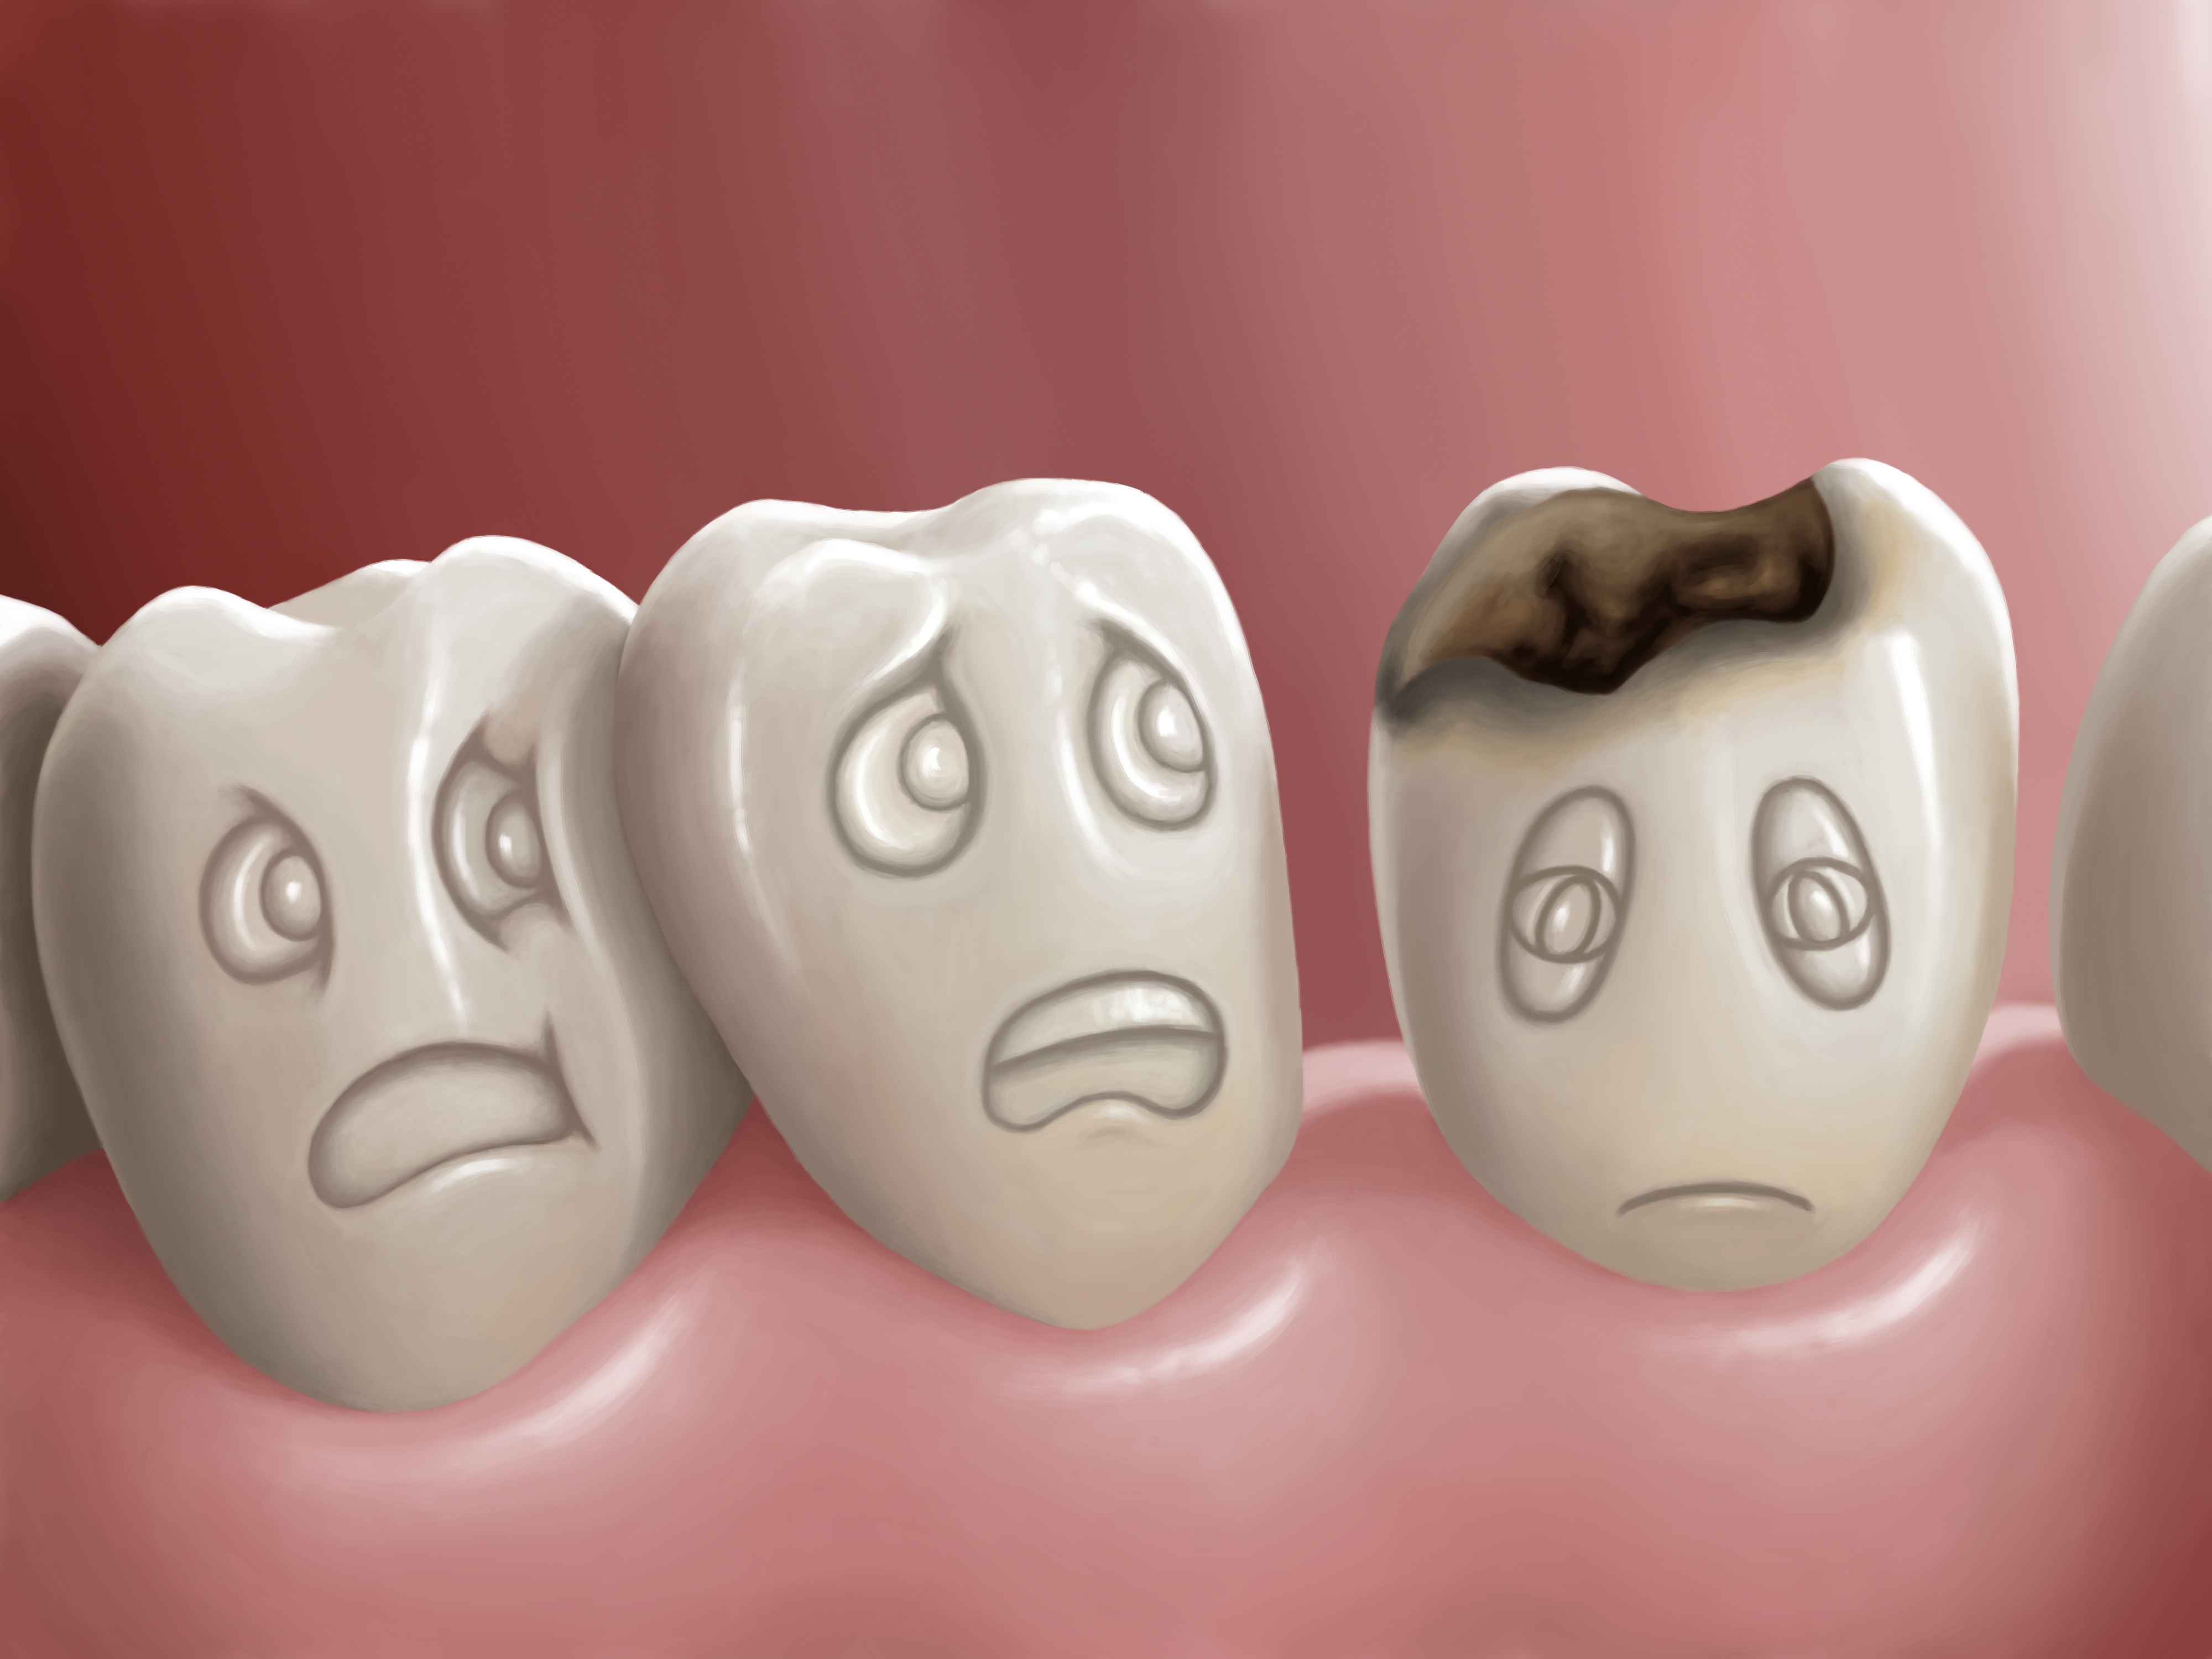 cartoon image of teeth looking at a sad tooth with a cavity